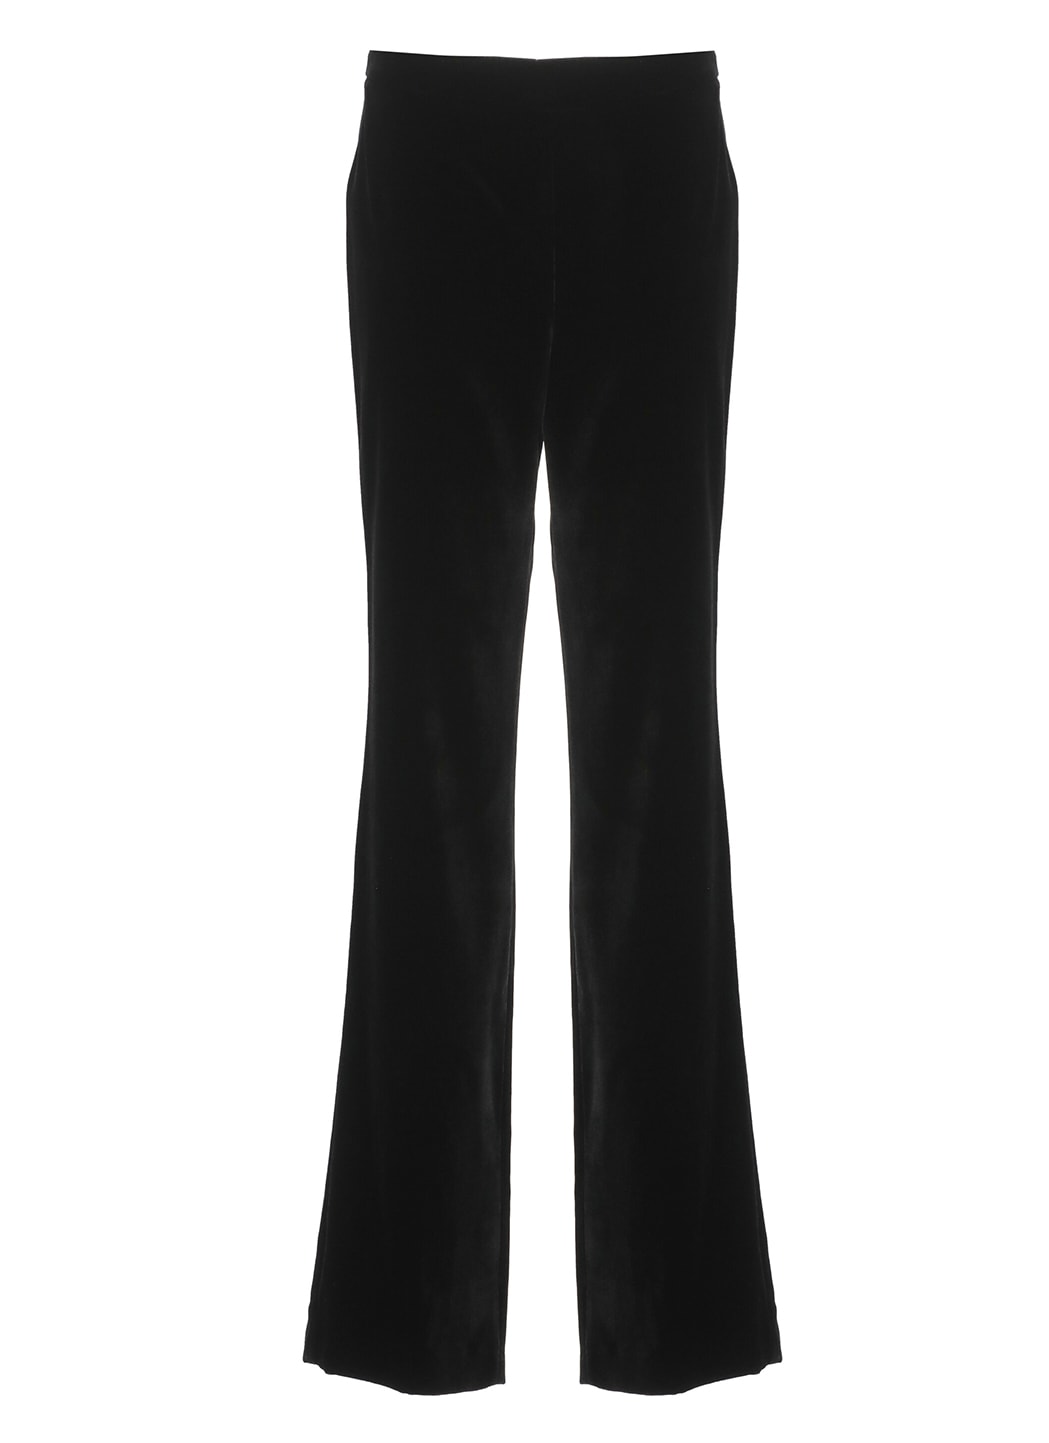 Boutique Moschino Velvet Trousers